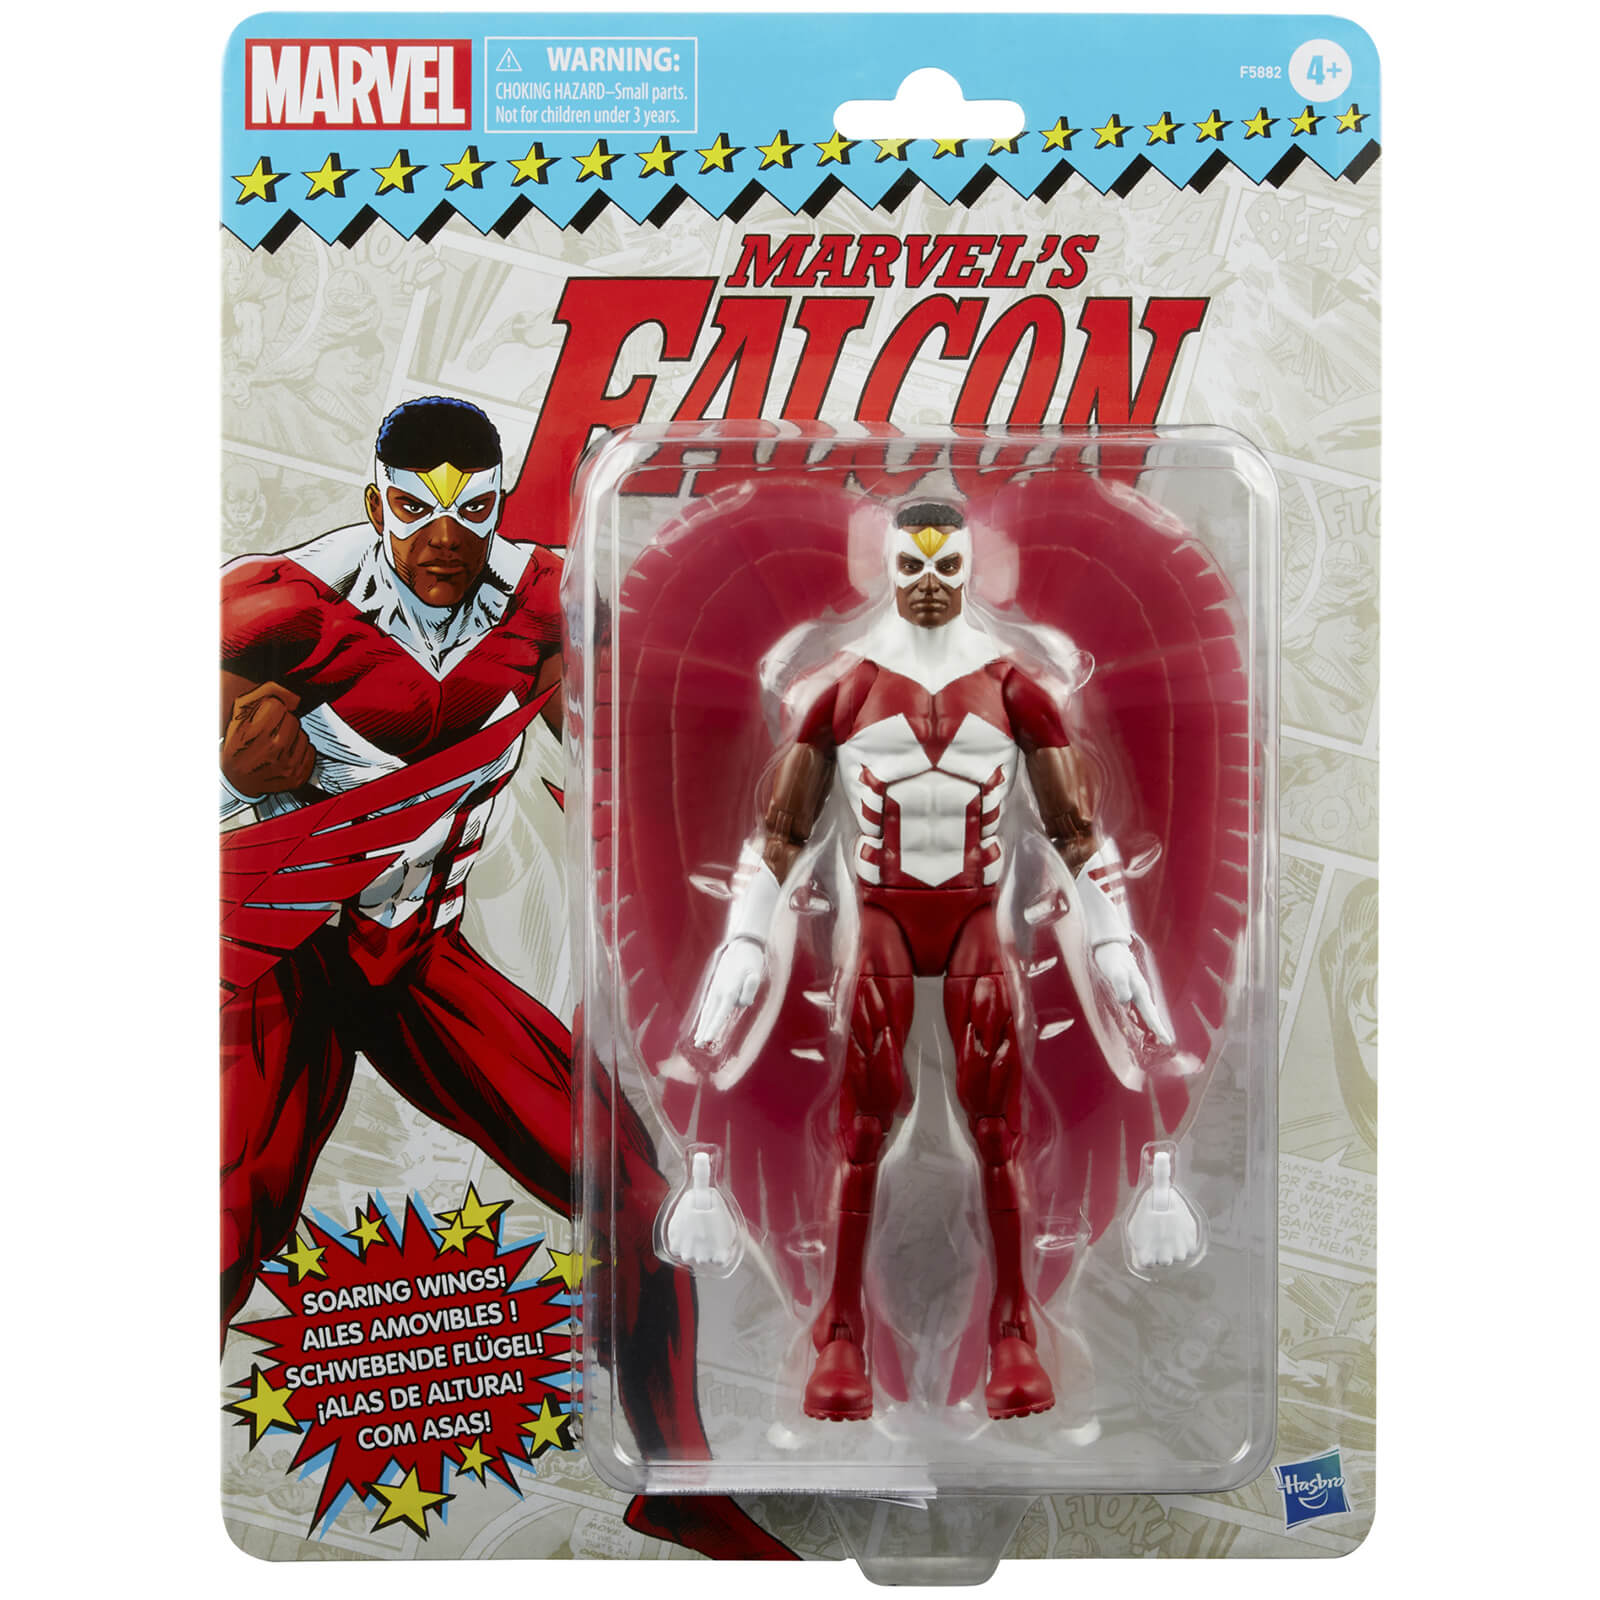 Hasbro Marvel Legends Series Marvel’s Falcon 6 Inch Action Figure product